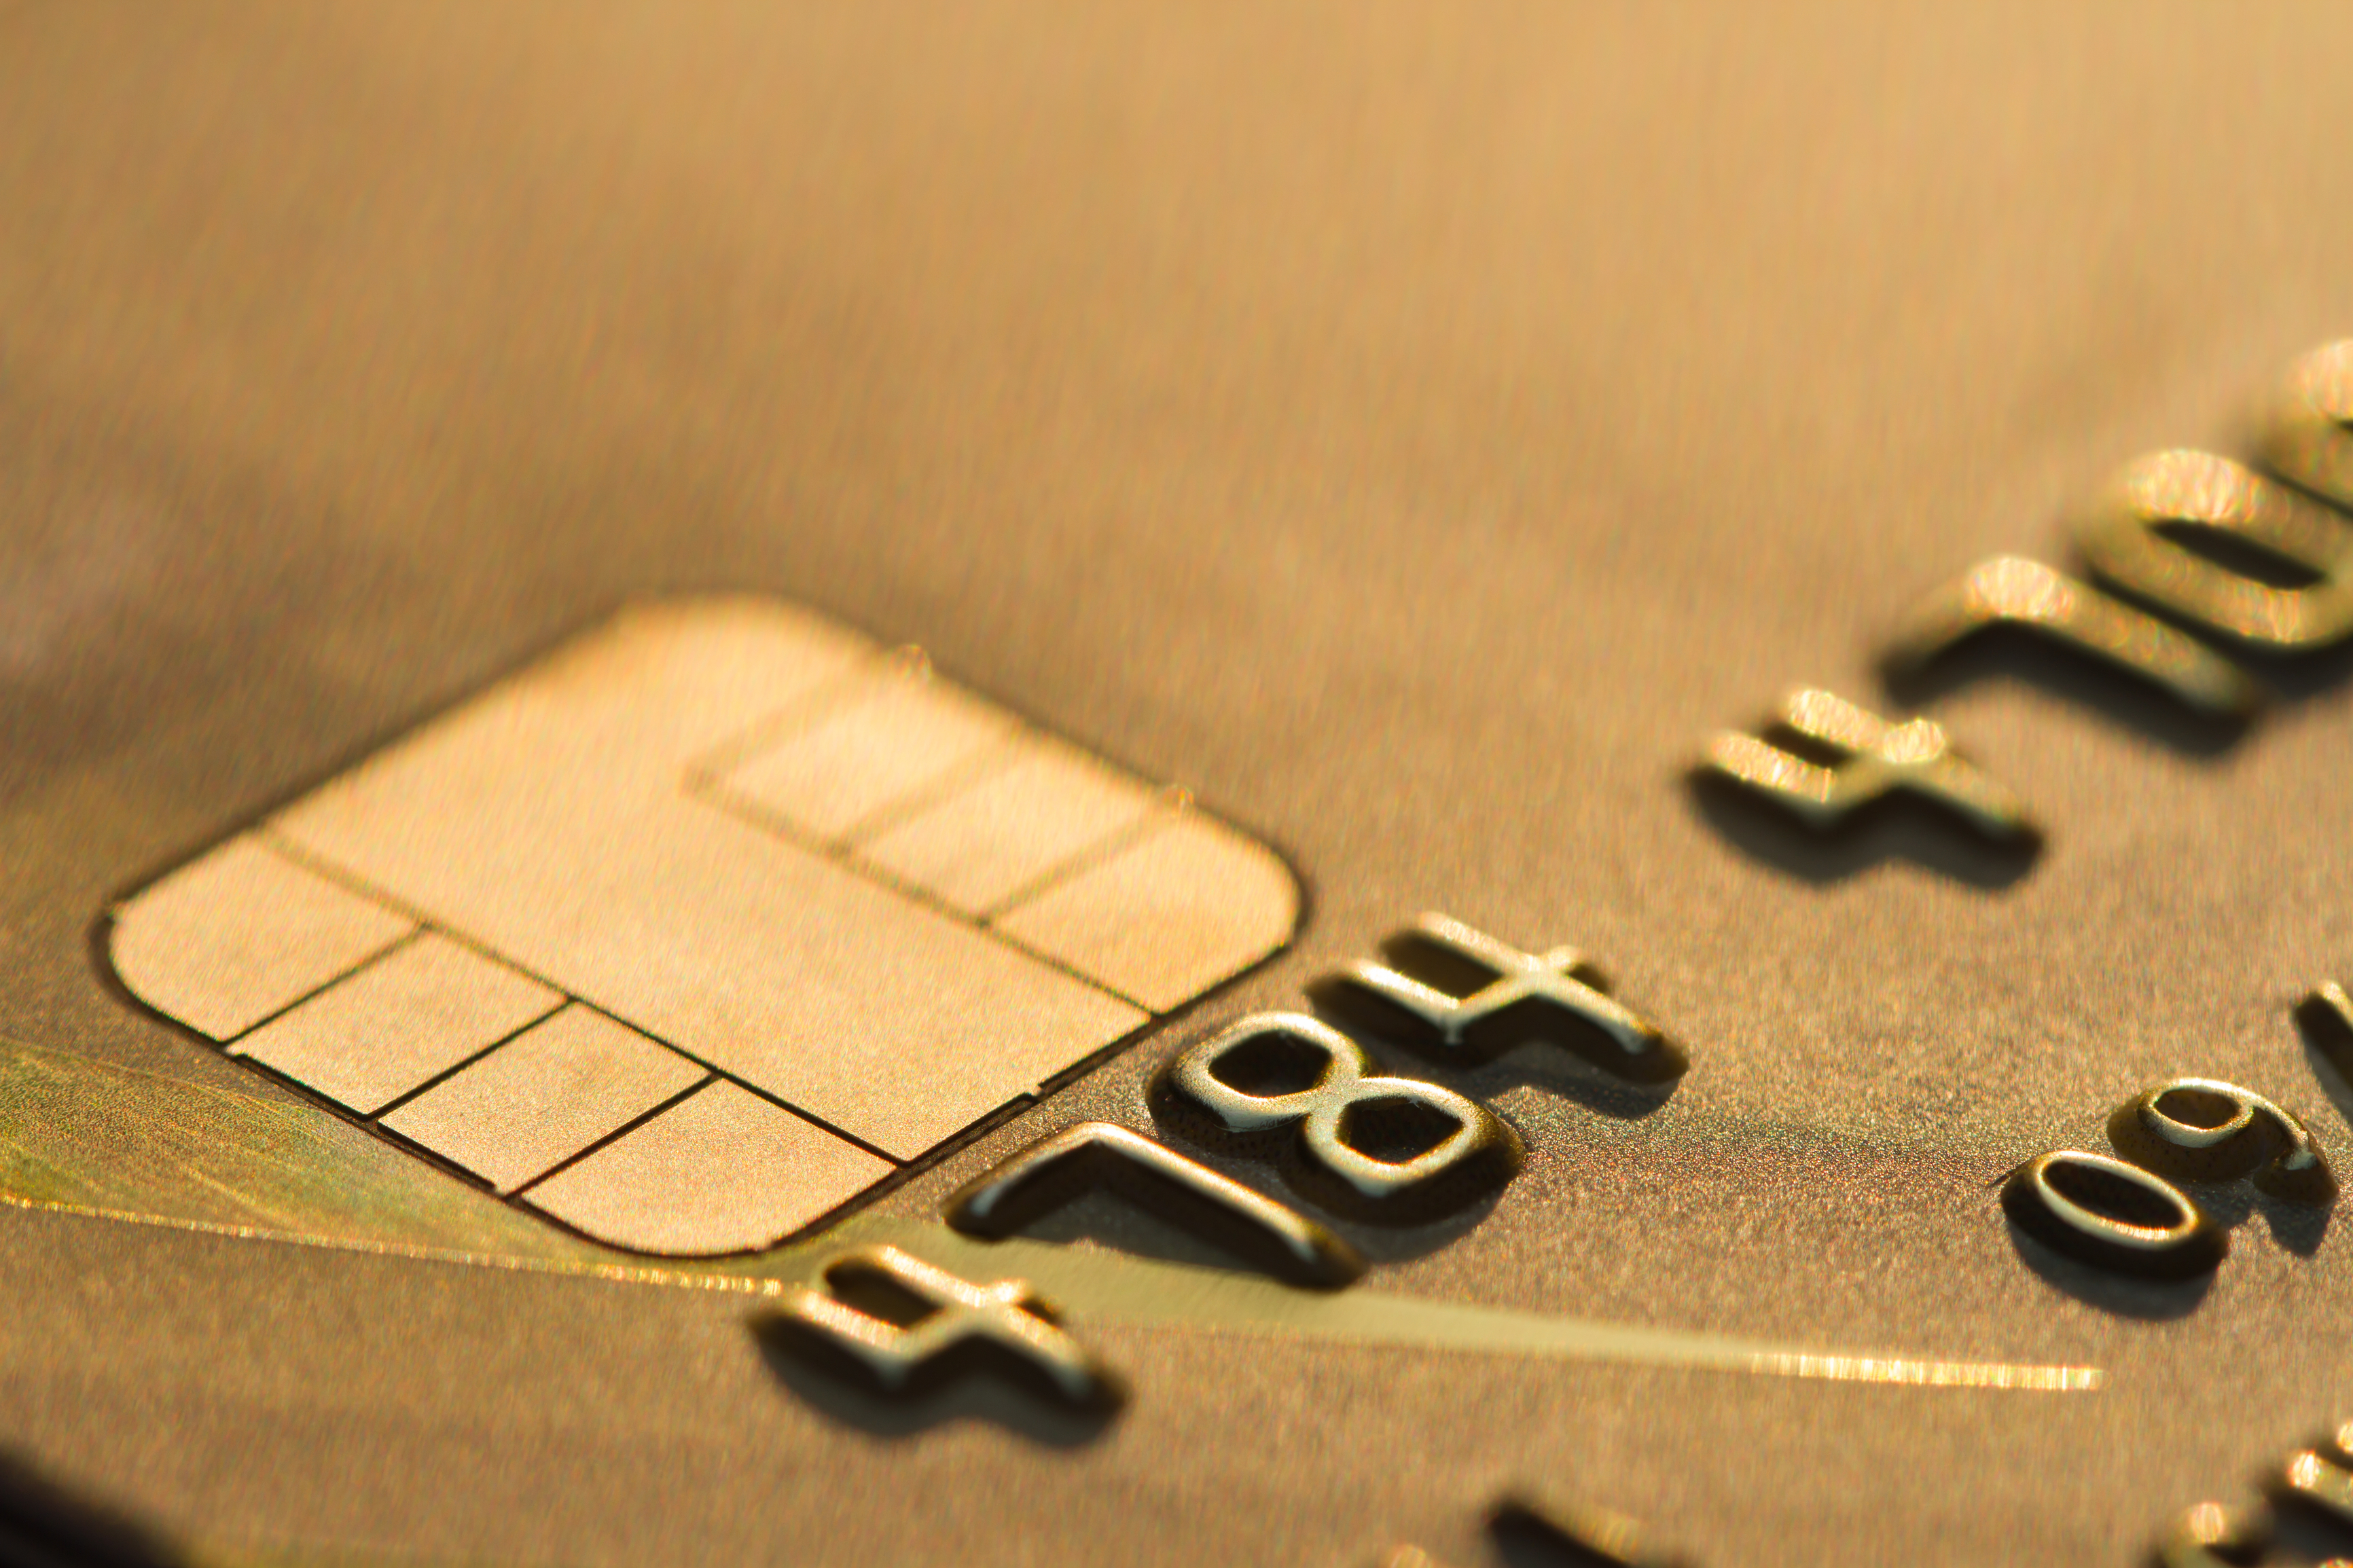 Are You Set Up to Accept EMV Transactions?